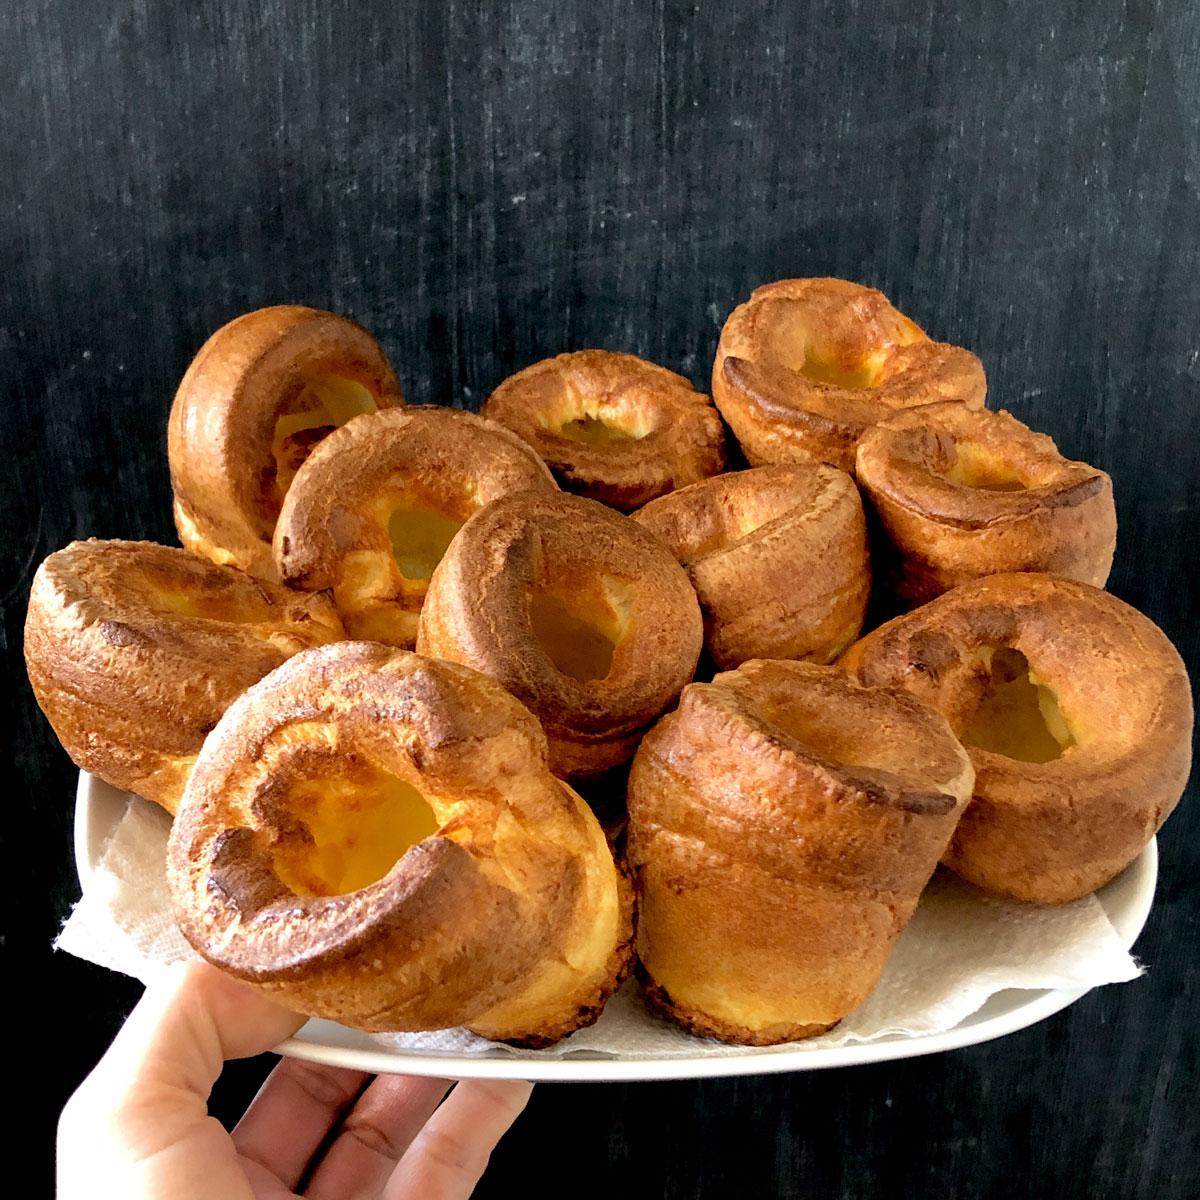 Yorkshire puddings on a plate.